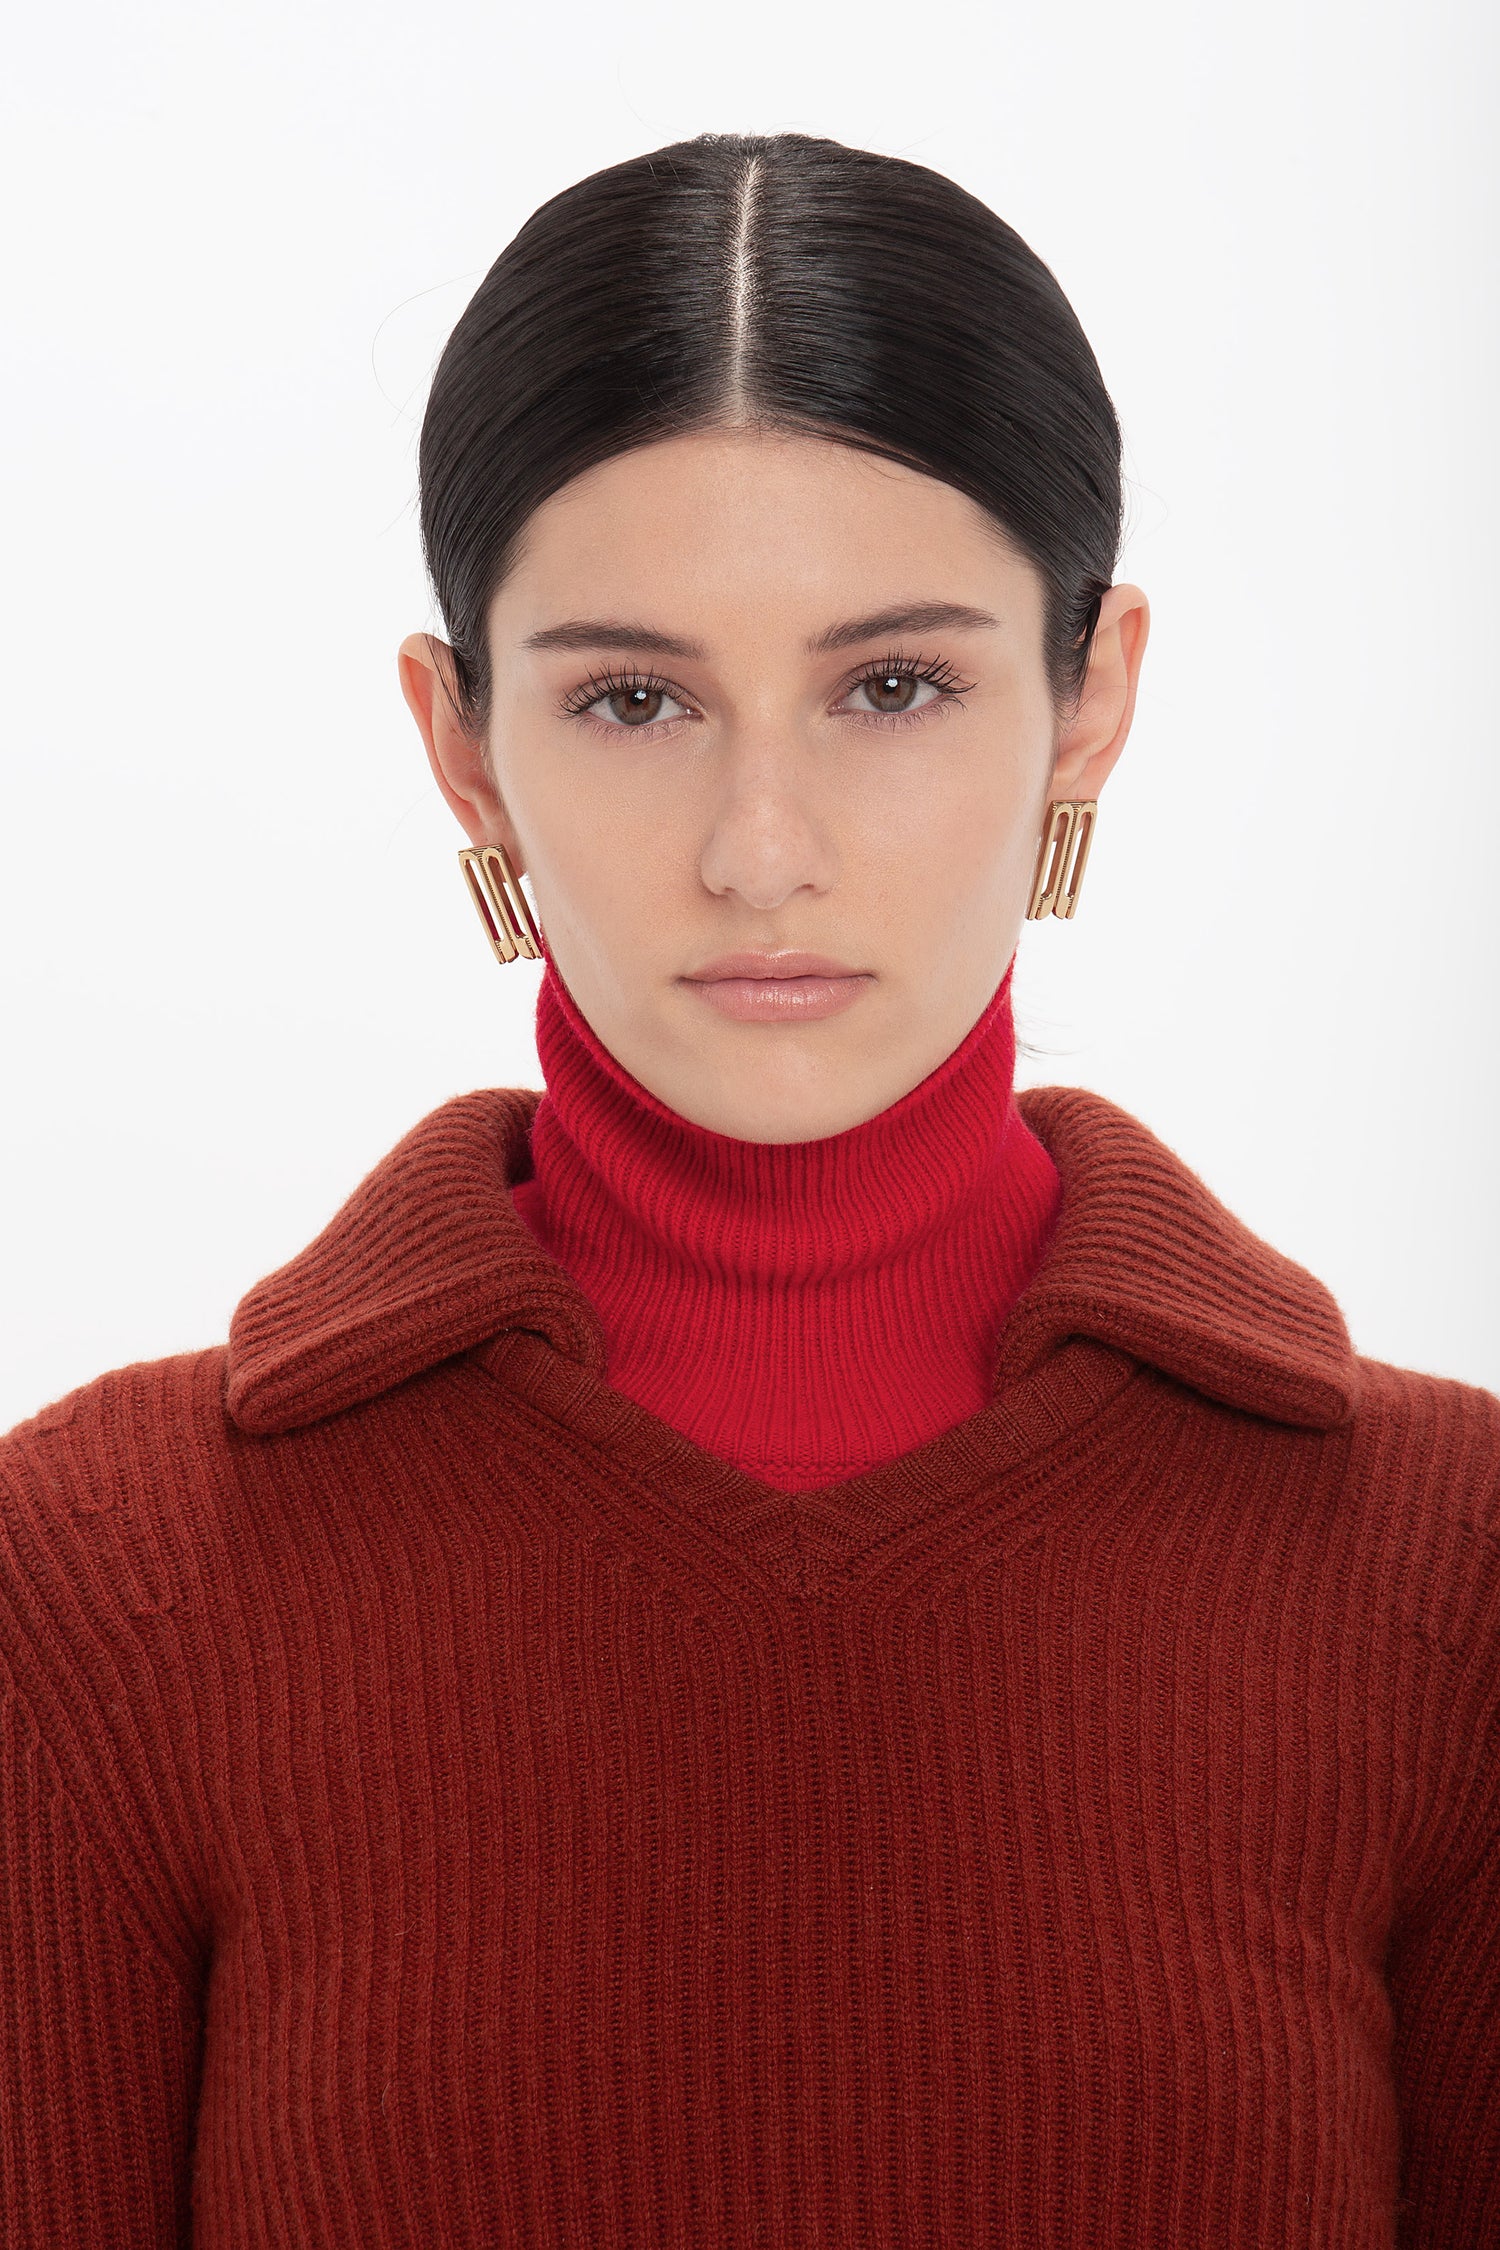 Woman with dark hair slicked back, reminiscent of Victoria Beckham's style, wears a red Double Collared Jumper In Russet by Victoria Beckham and gold hoop earrings, facing the camera.